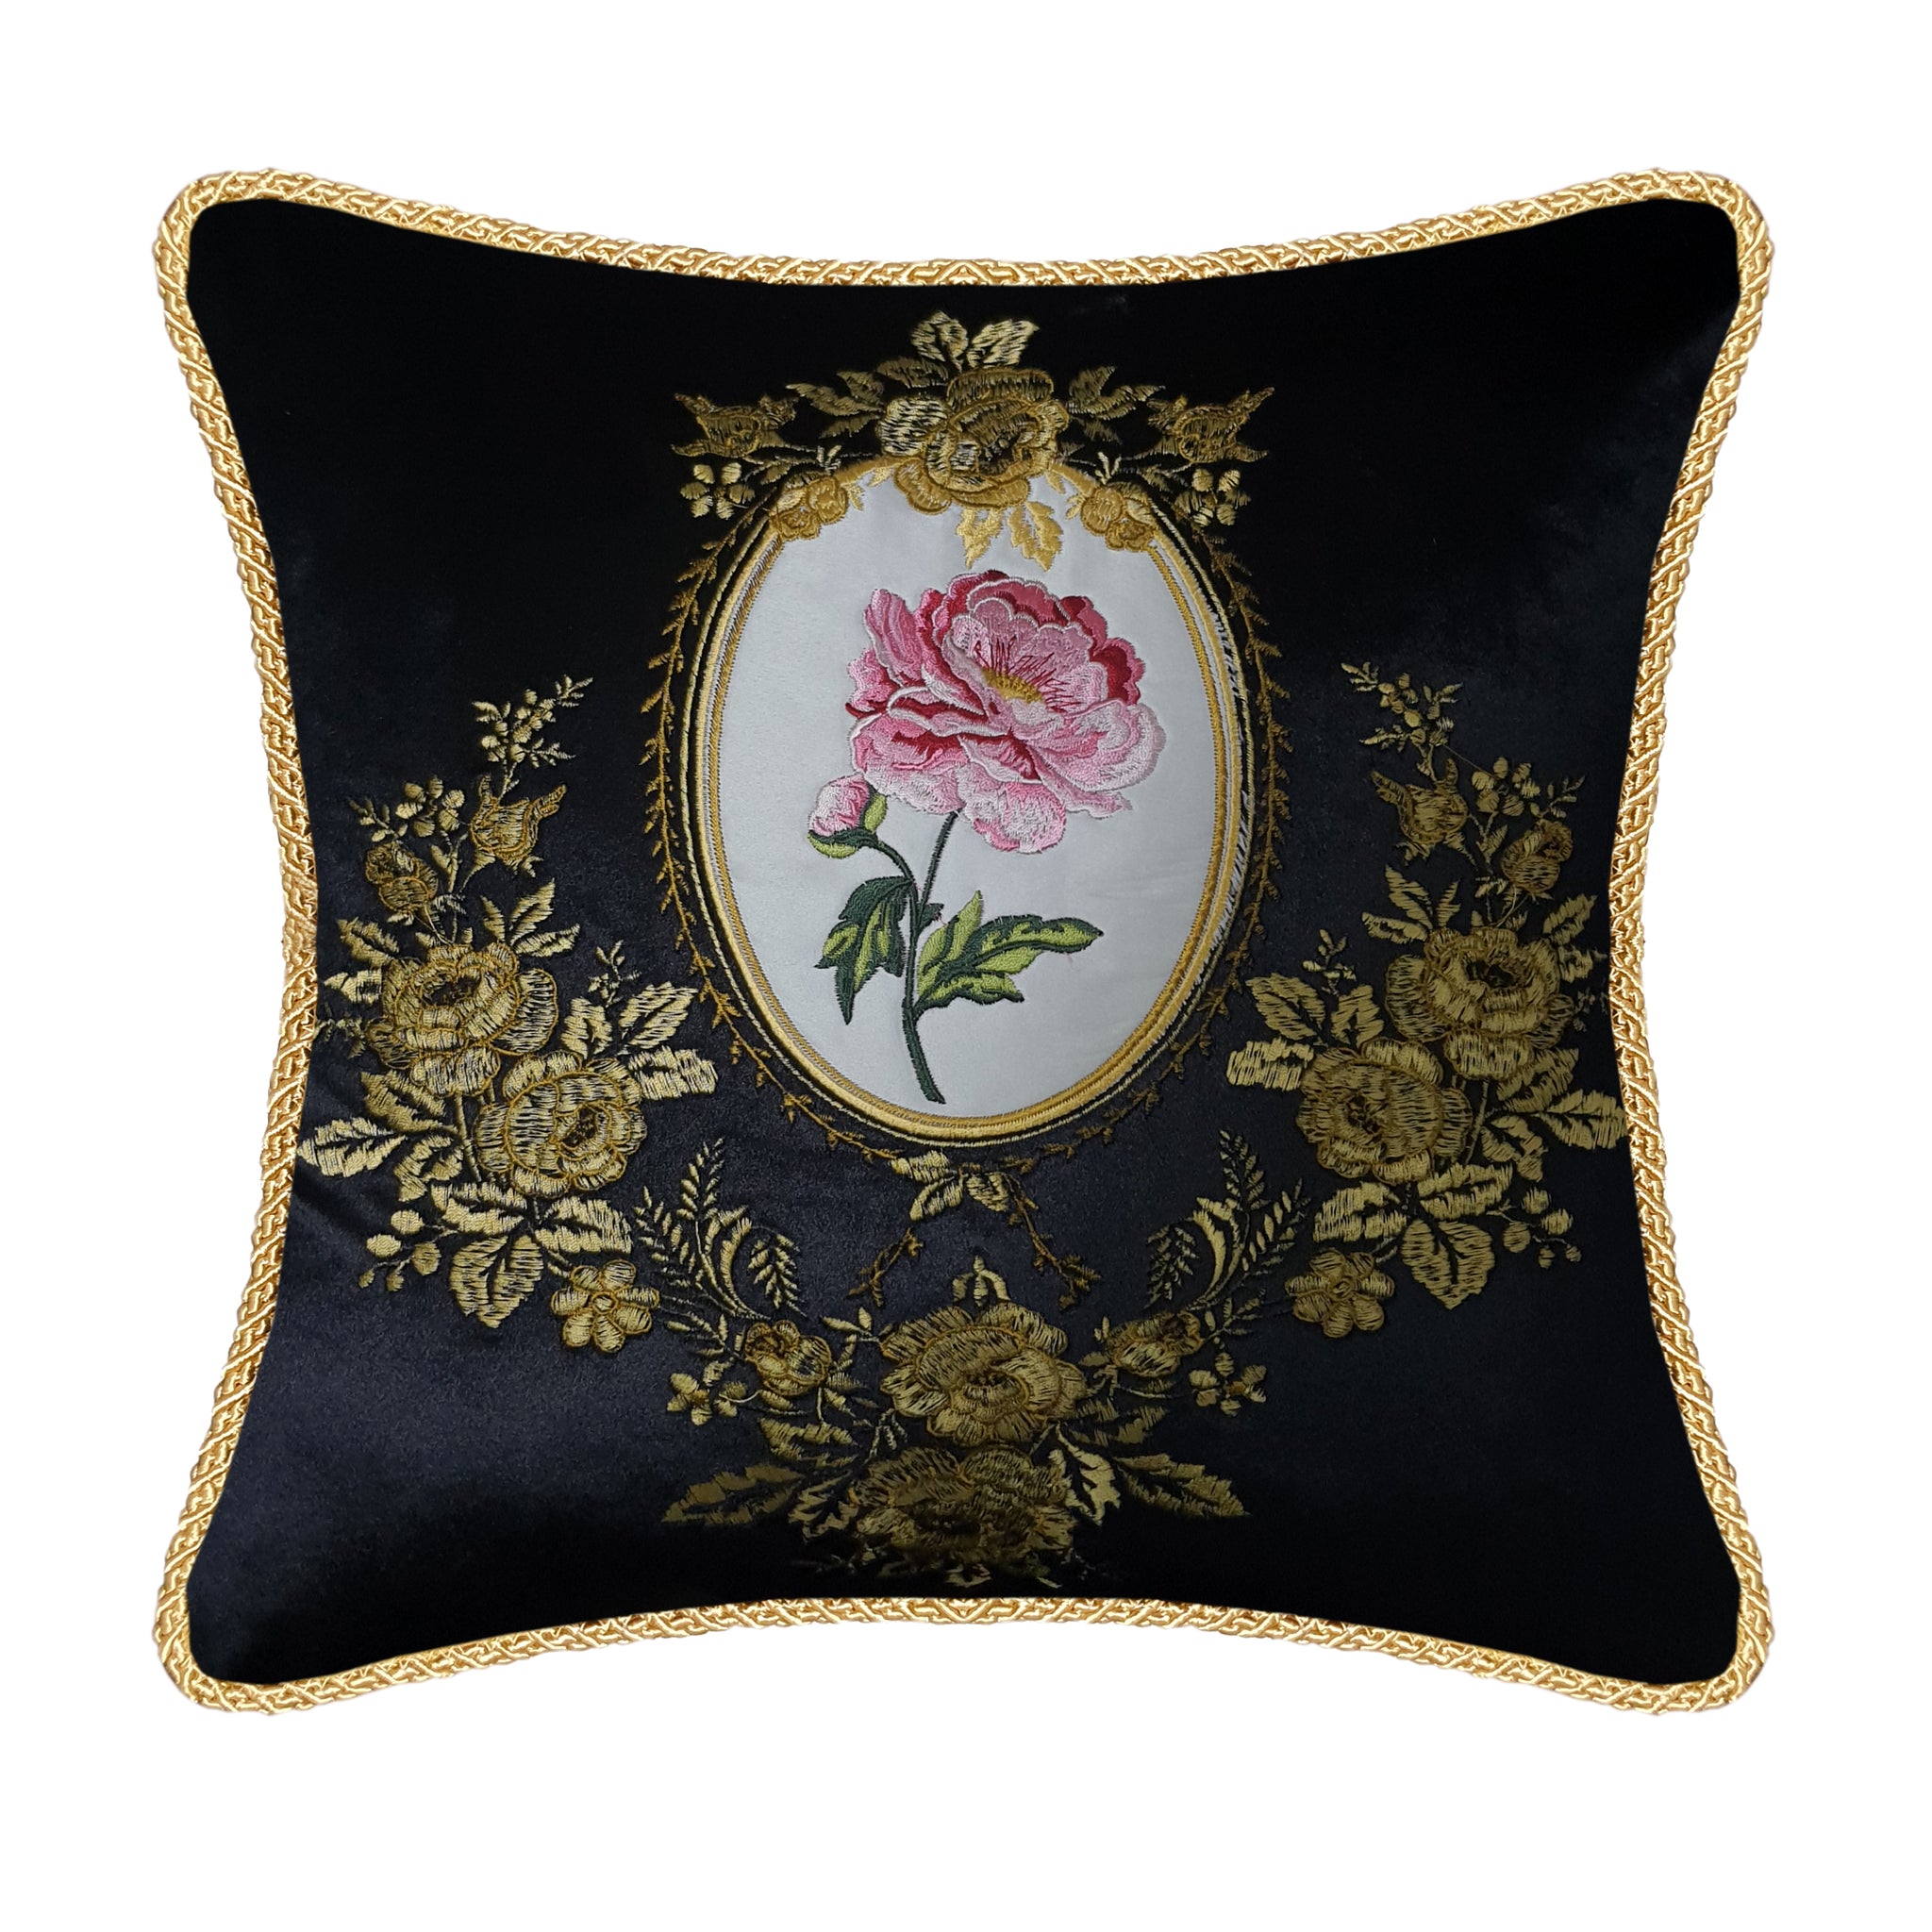 Velvet Cushion Cover Victorian Rose Decorative Pillowcase Classic Floral Embroidery Throw Pillow for Sofa Chair Living Room 45x45 cm